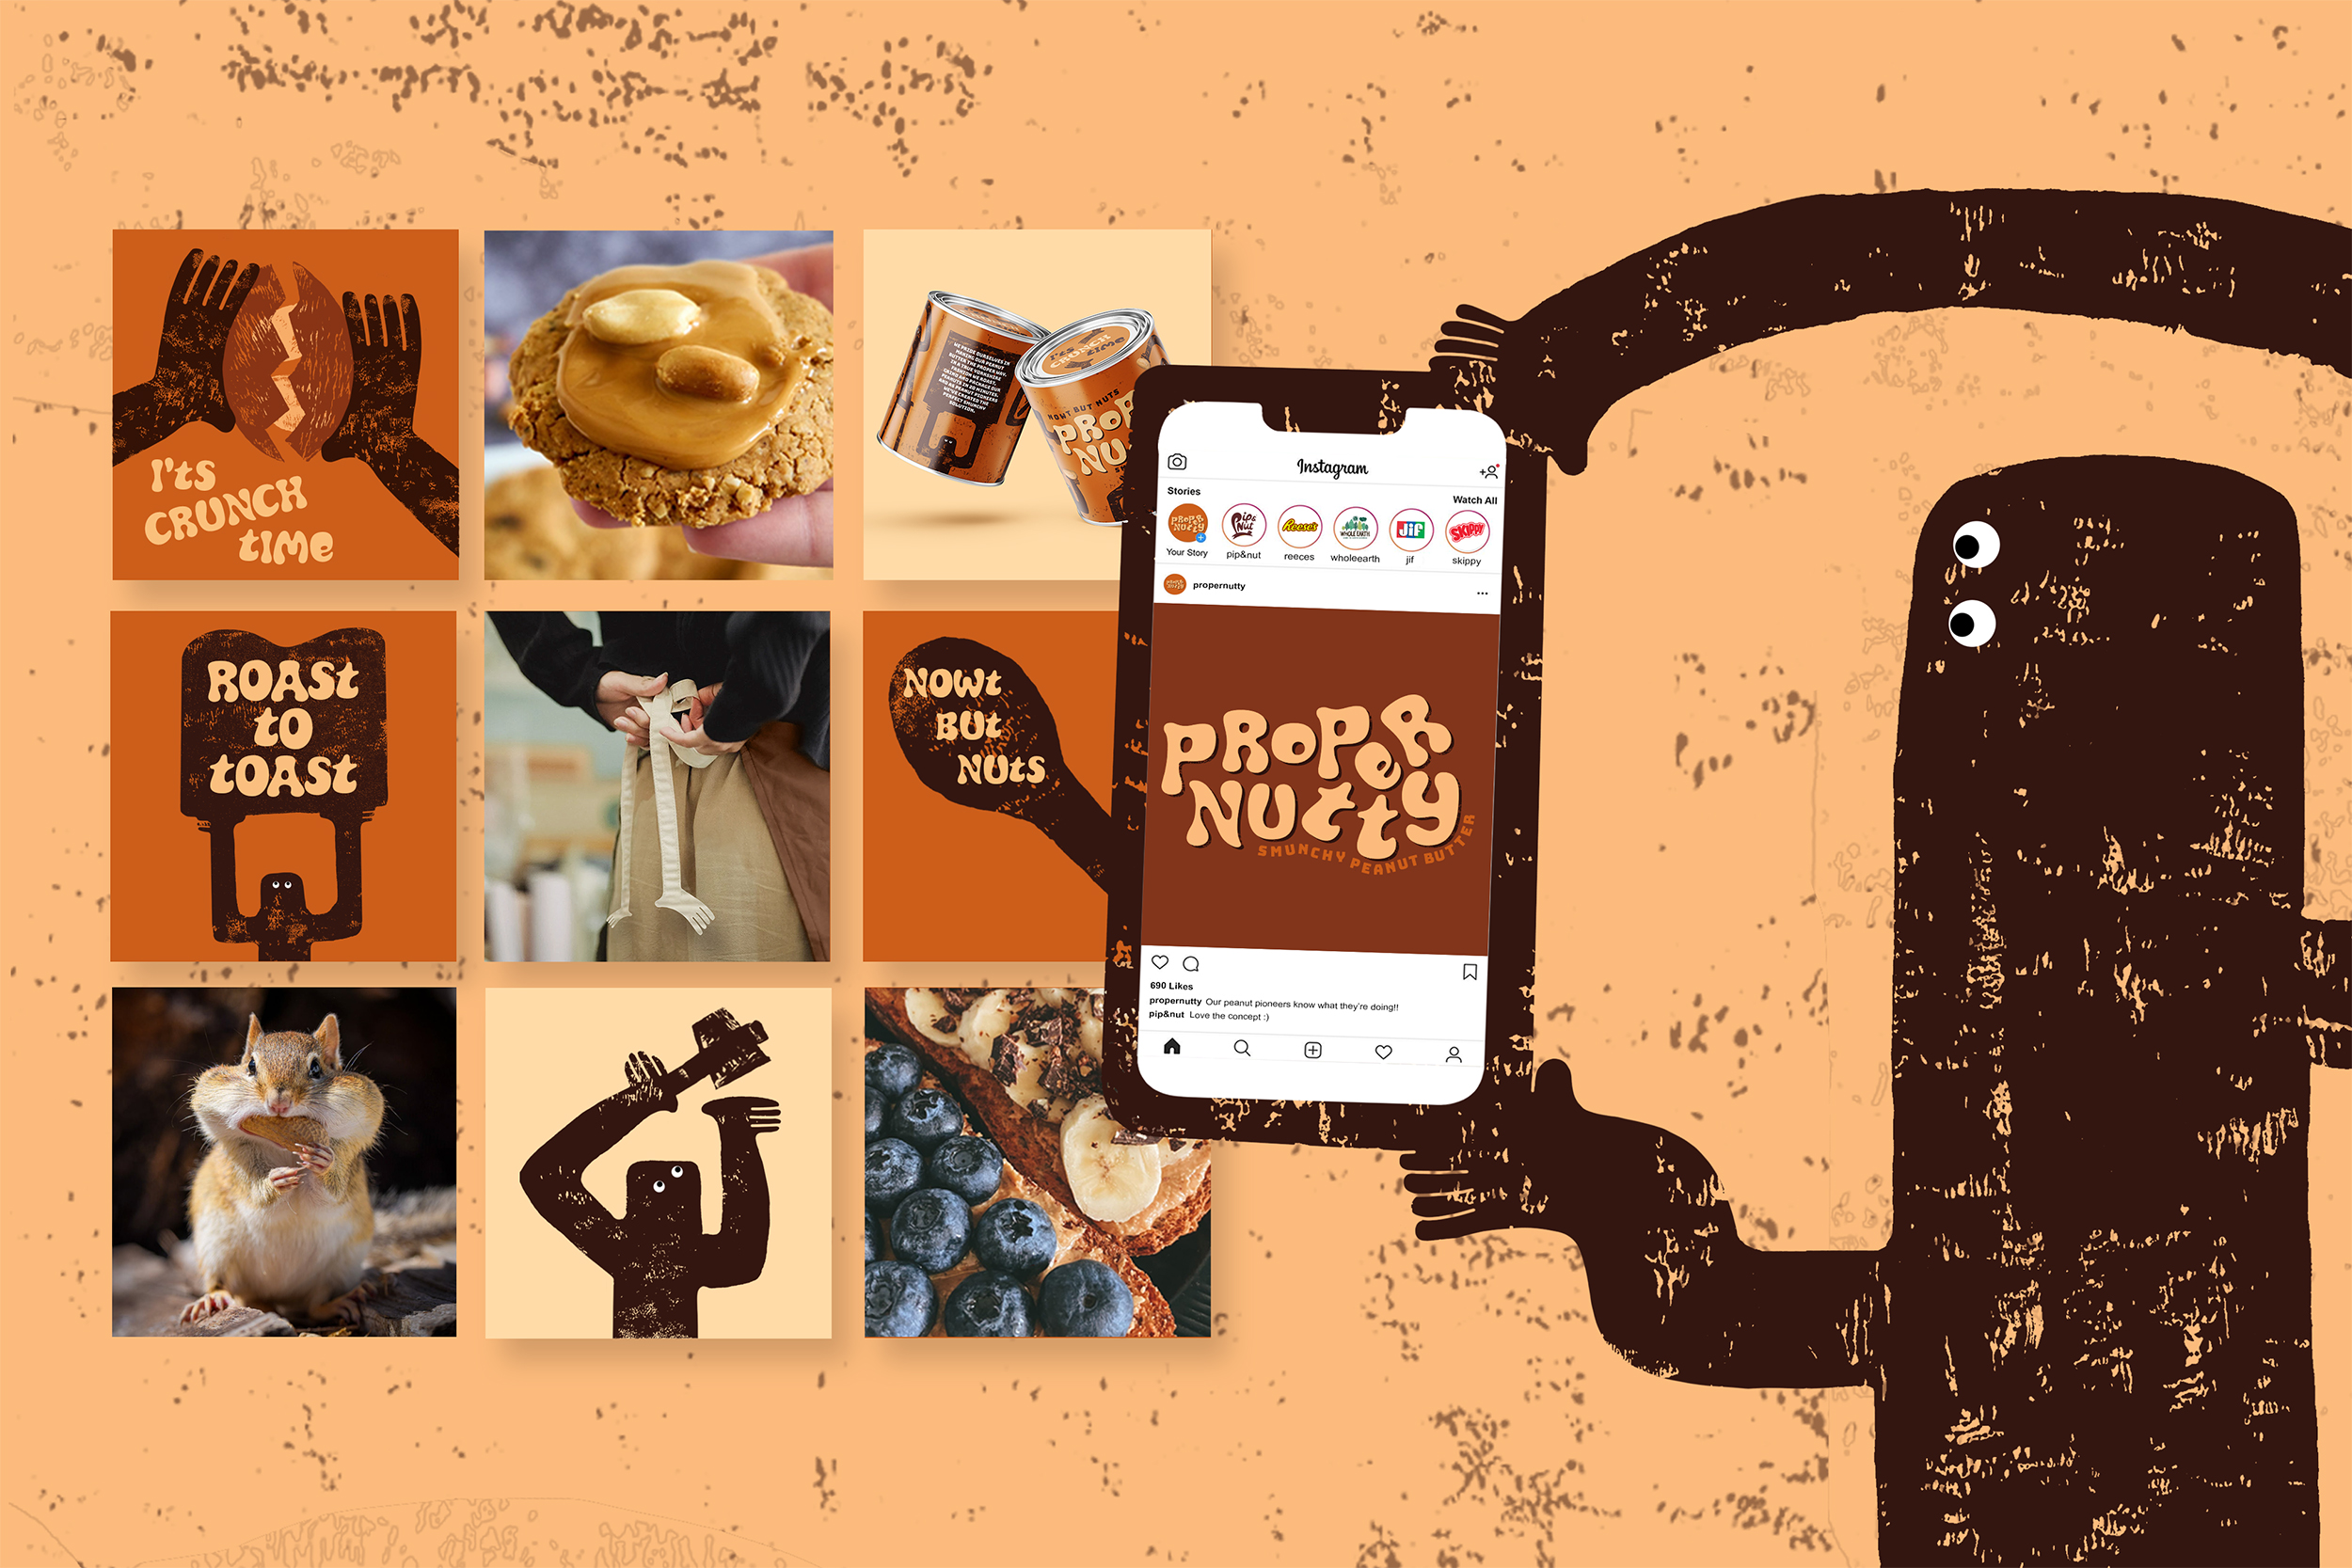 Showing distinctive and playful social media posts for Proper Nutty. Incorporating the brand mascot peanut pioneers.